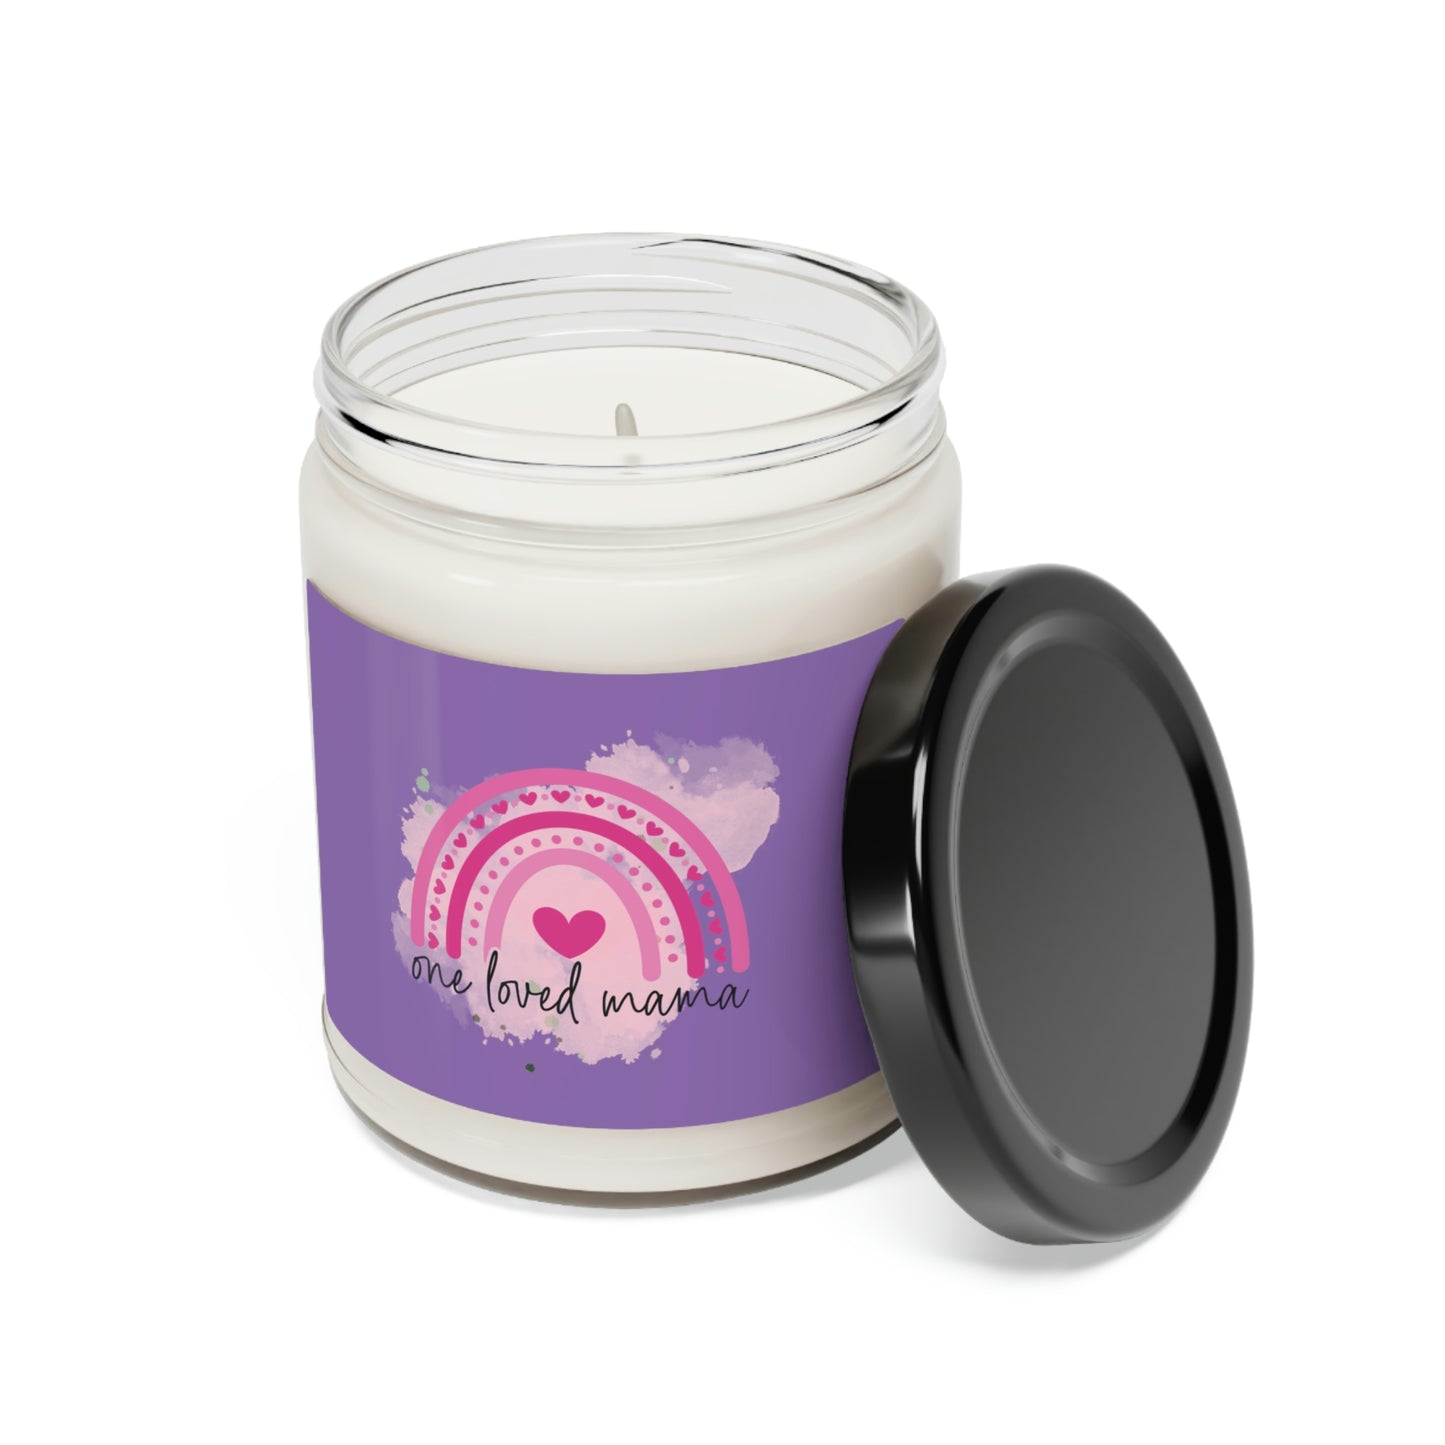 One Loved Mama Scented Soy Candle, 9oz